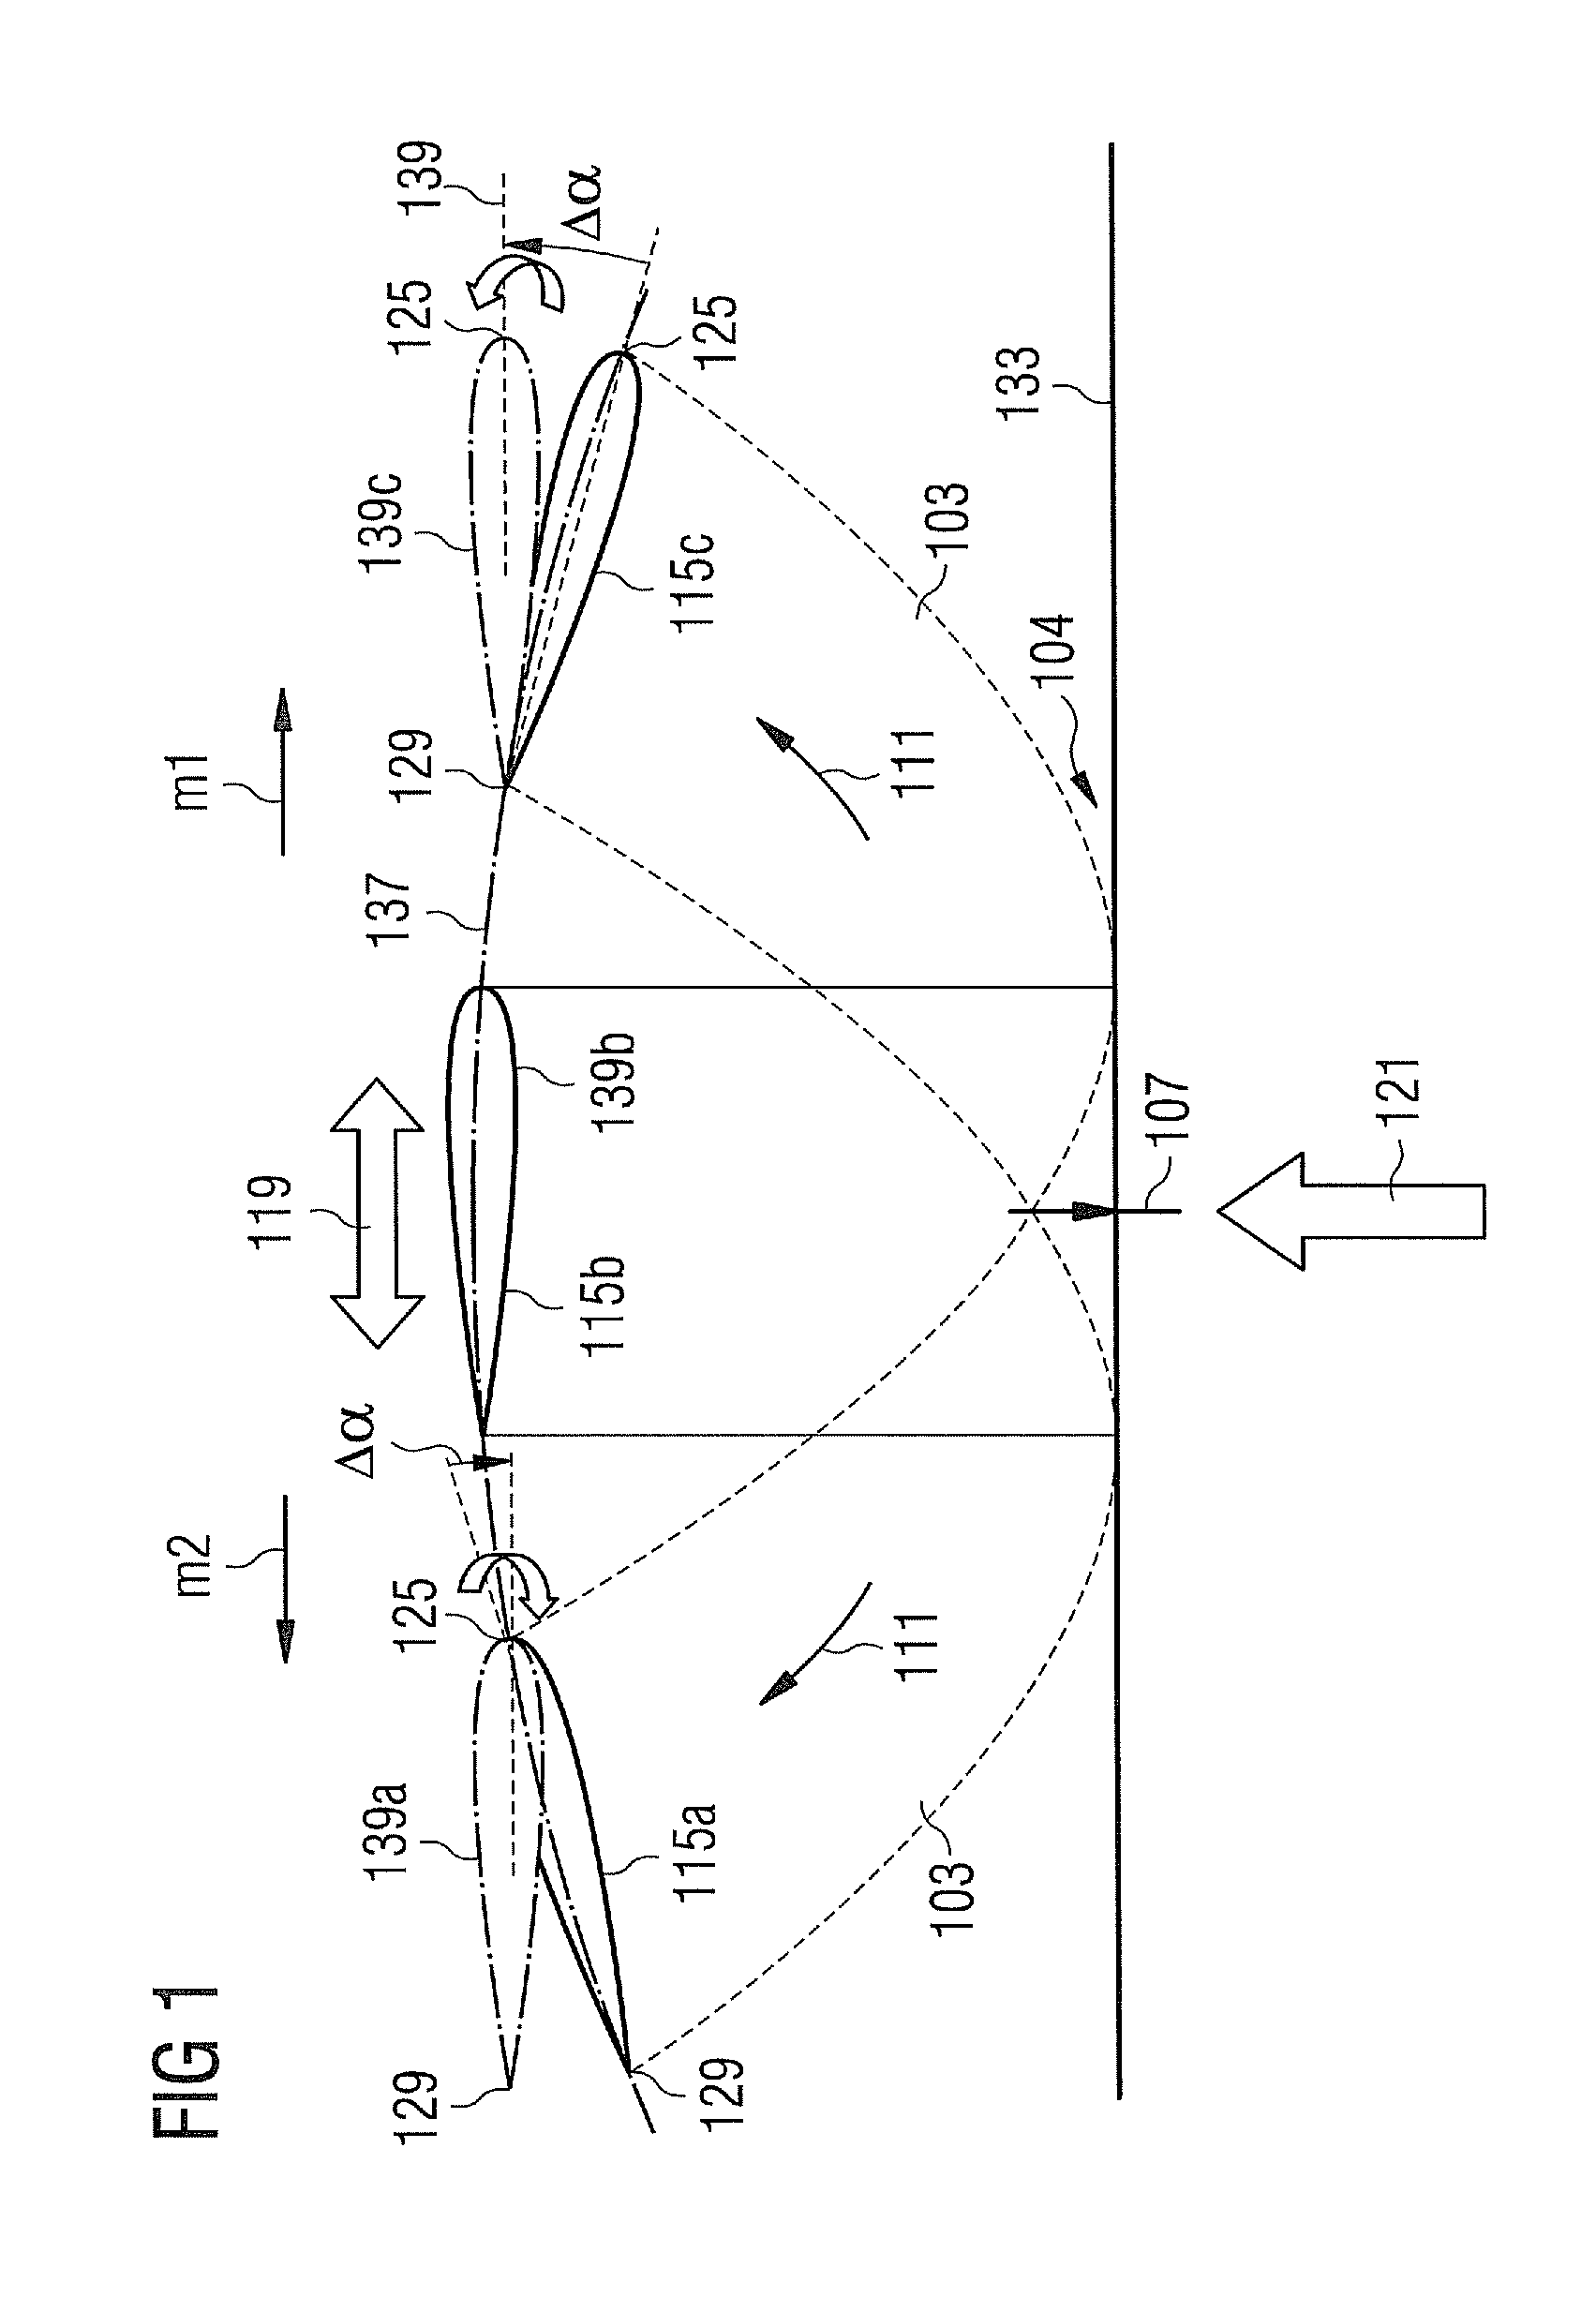 Method and controller for generating a blade pitch angle control signal and wind turbine comprising the controller